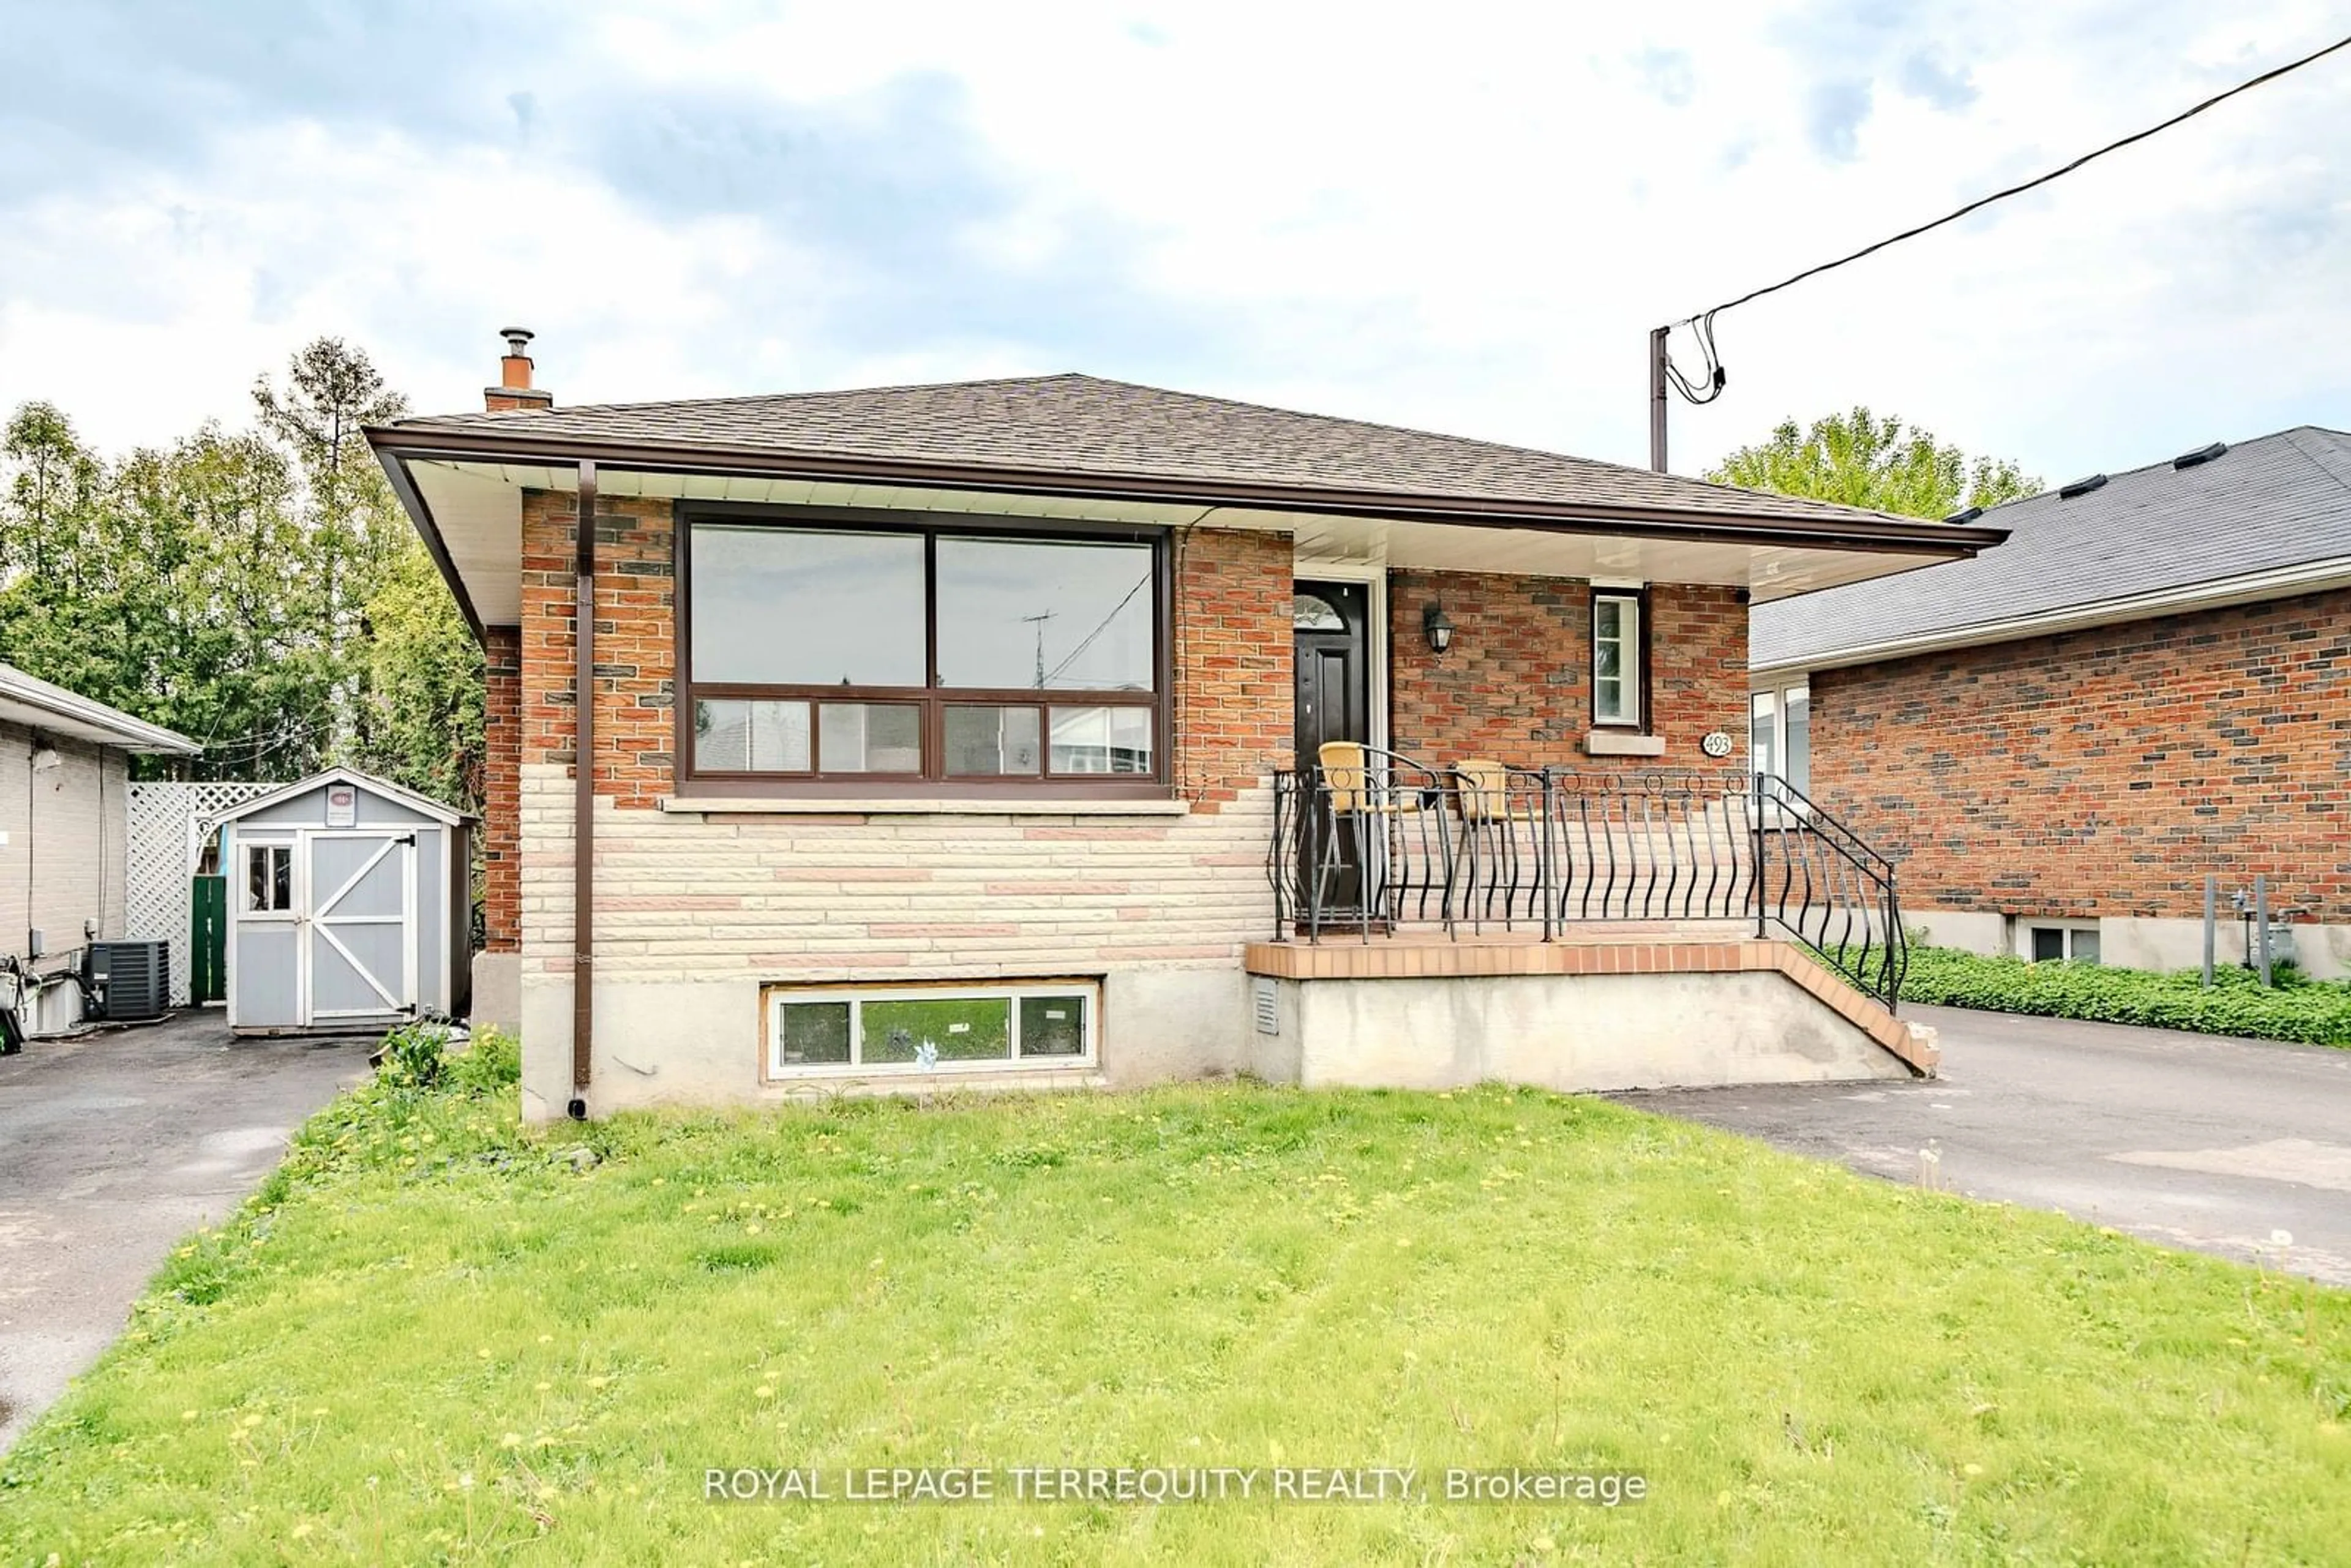 Frontside or backside of a home for 493 Lowell Ave, Oshawa Ontario L1J 2X6